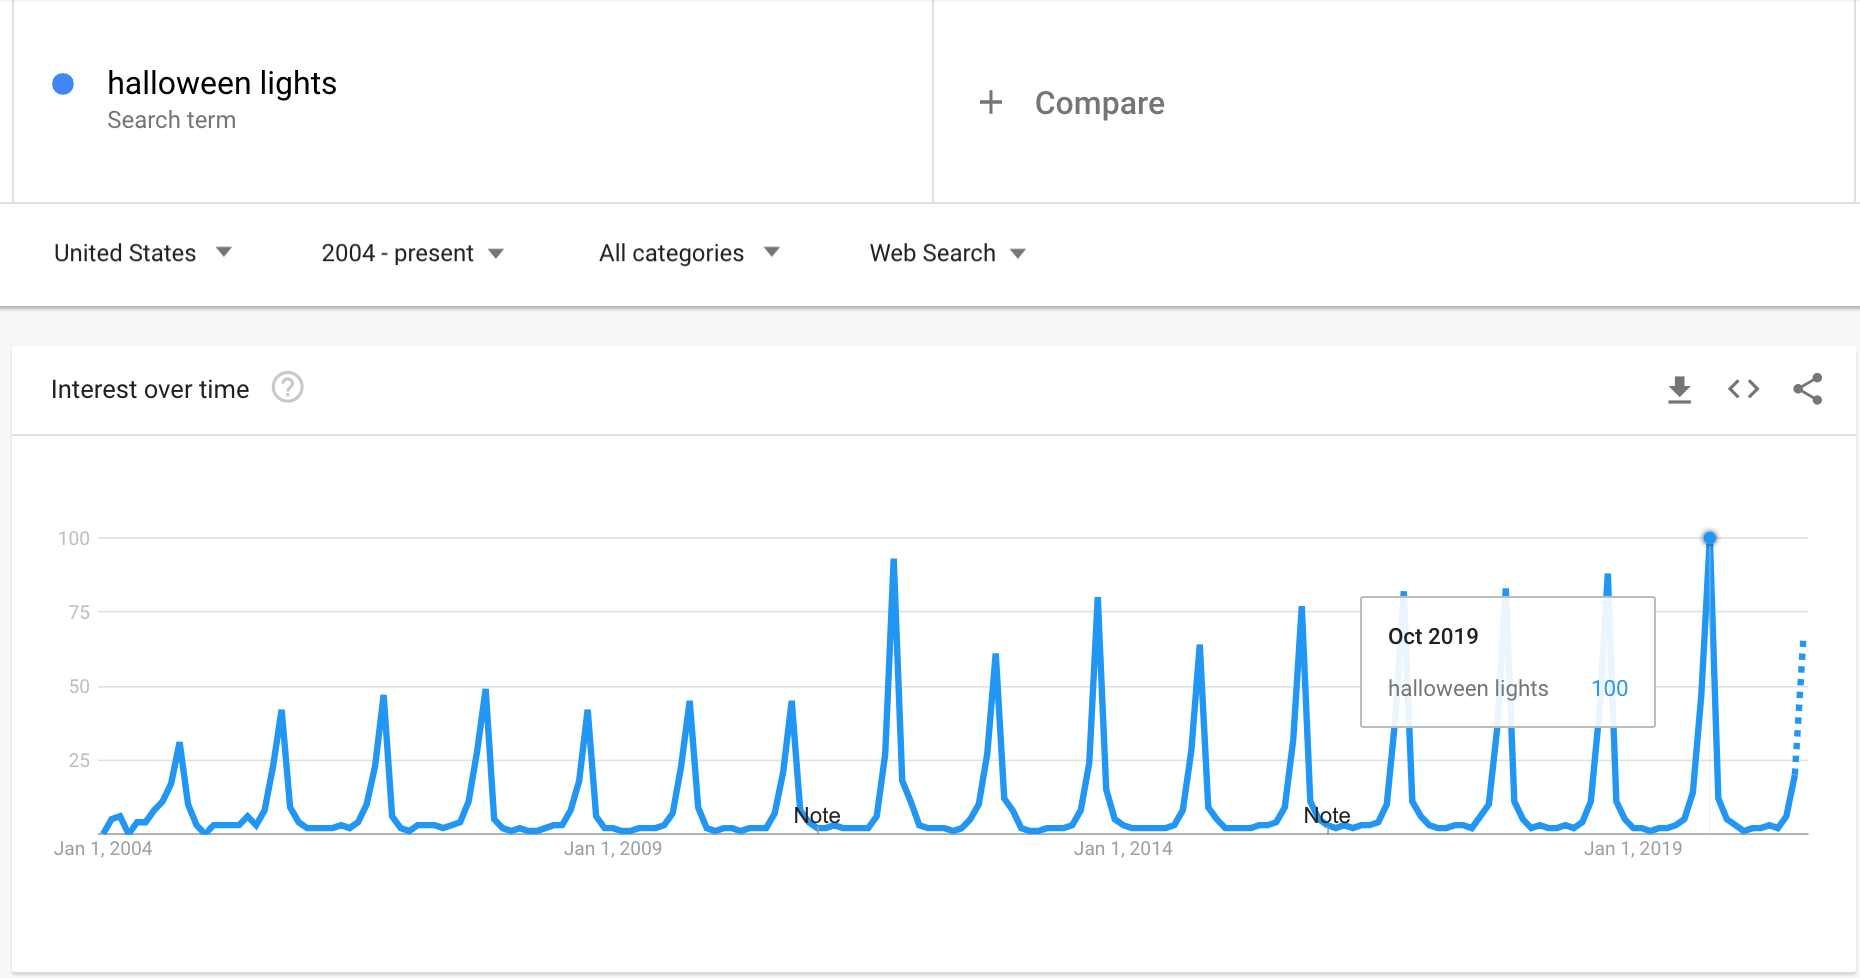 Google Trends graph showing the interest in Halloween lights